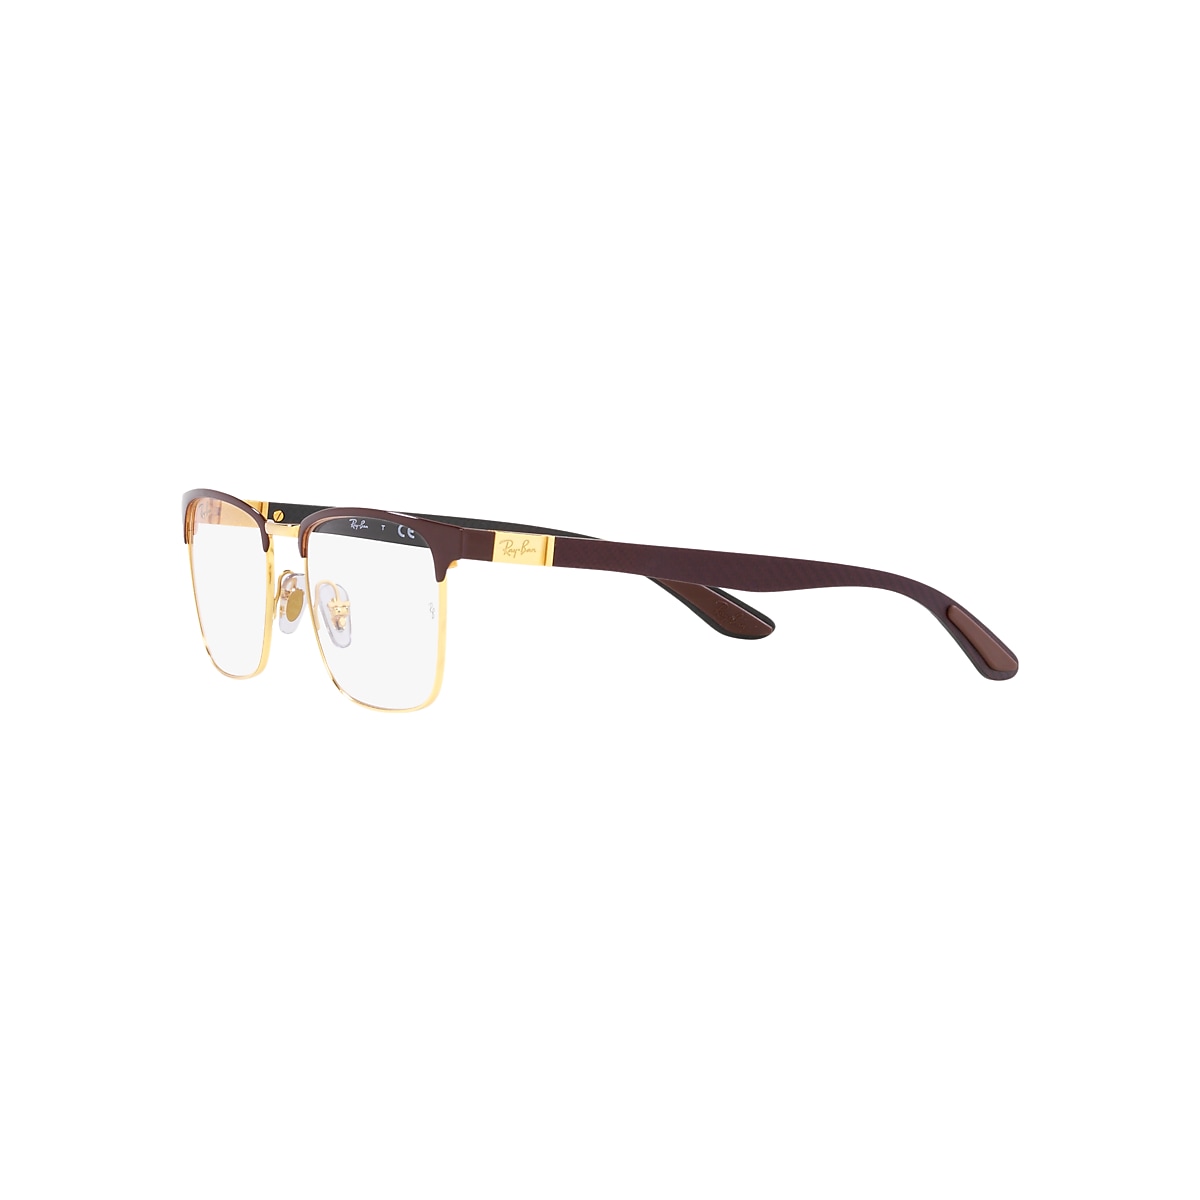 RB8421 OPTICS Eyeglasses with Brown On Gold Frame - RB8421 | Ray